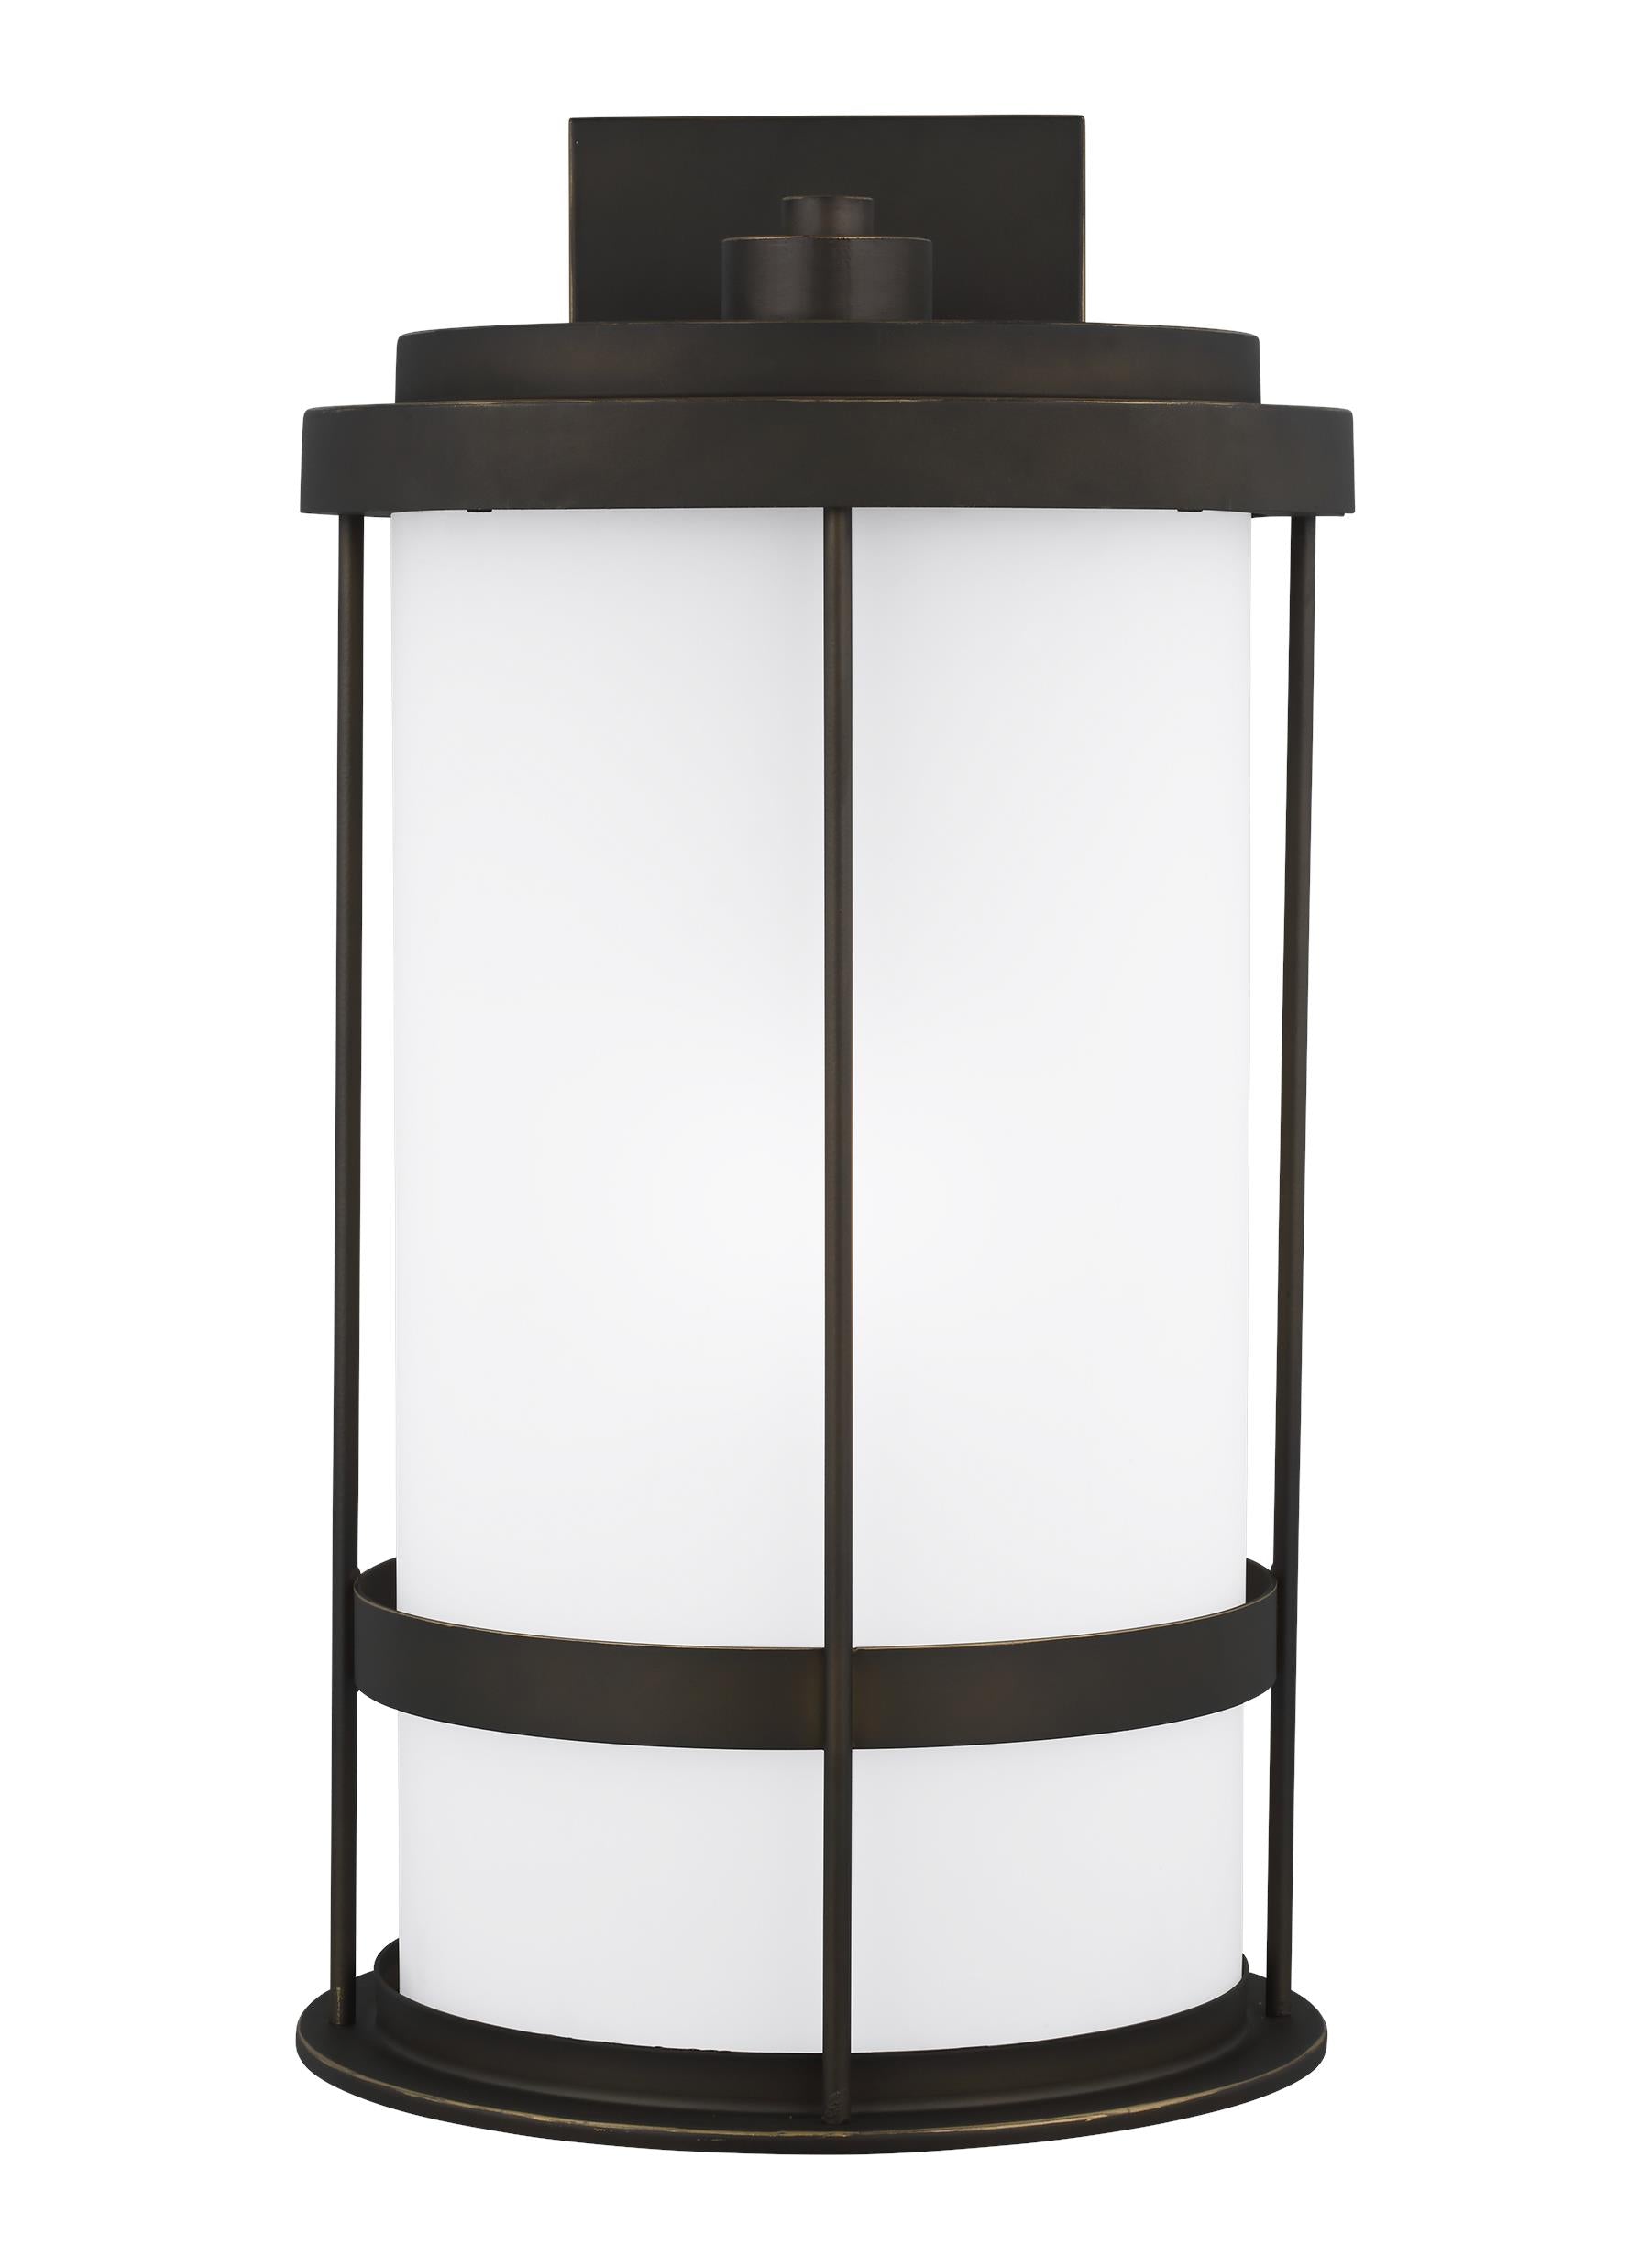 Wilburn modern 1-light outdoor exterior extra large wall lantern sconce in antique bronze finish with satin etched glass s...